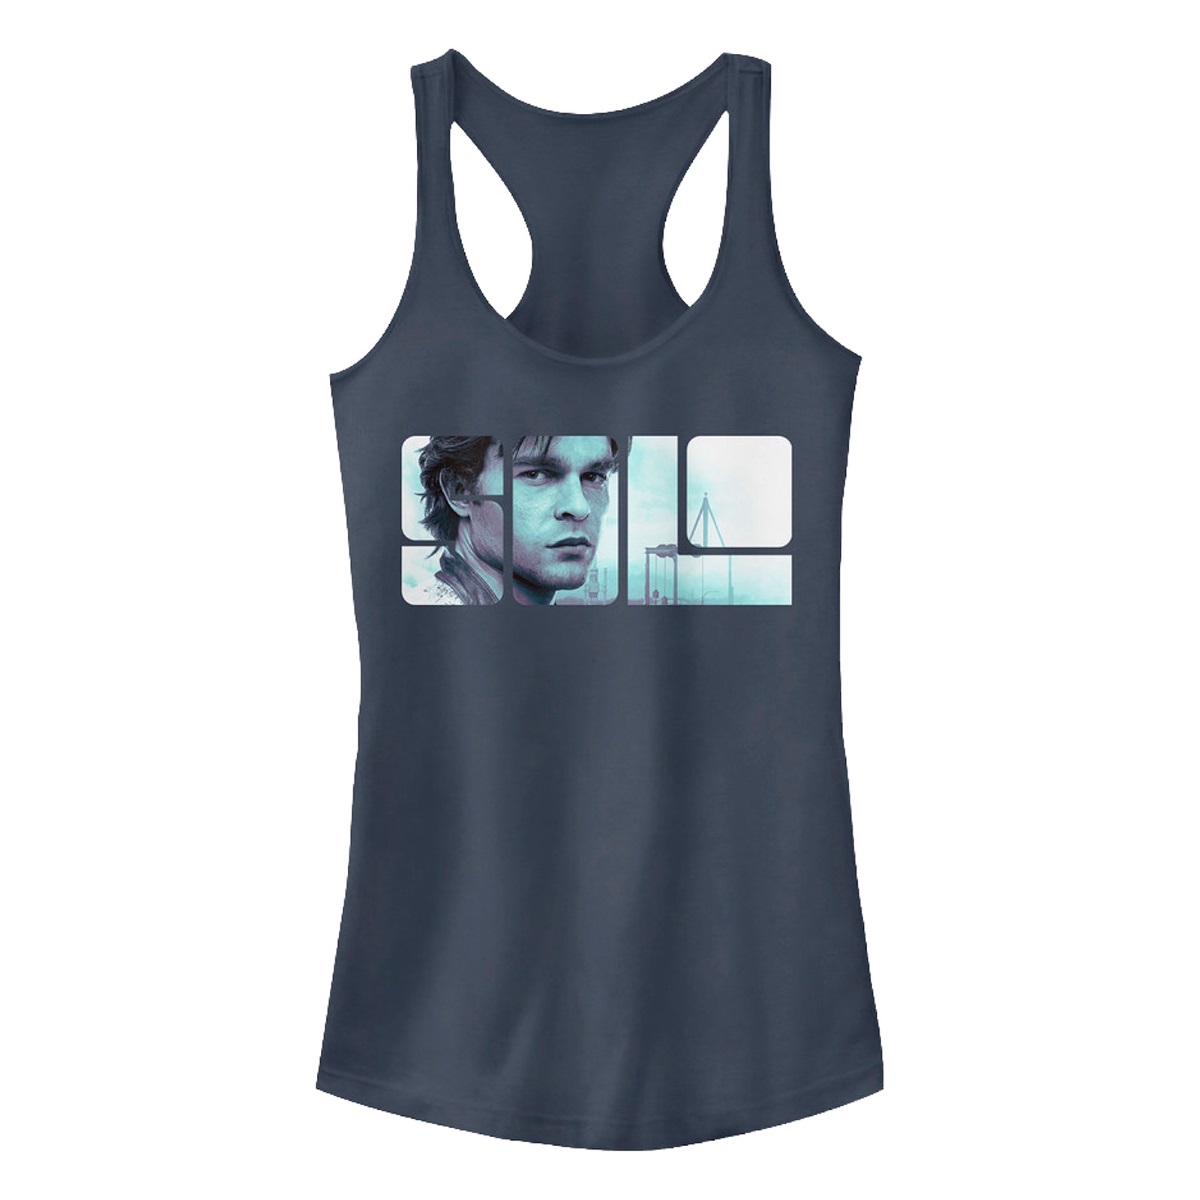 Women's Solo A Star Wars Story Han Solo Tank Top at 80's Tees